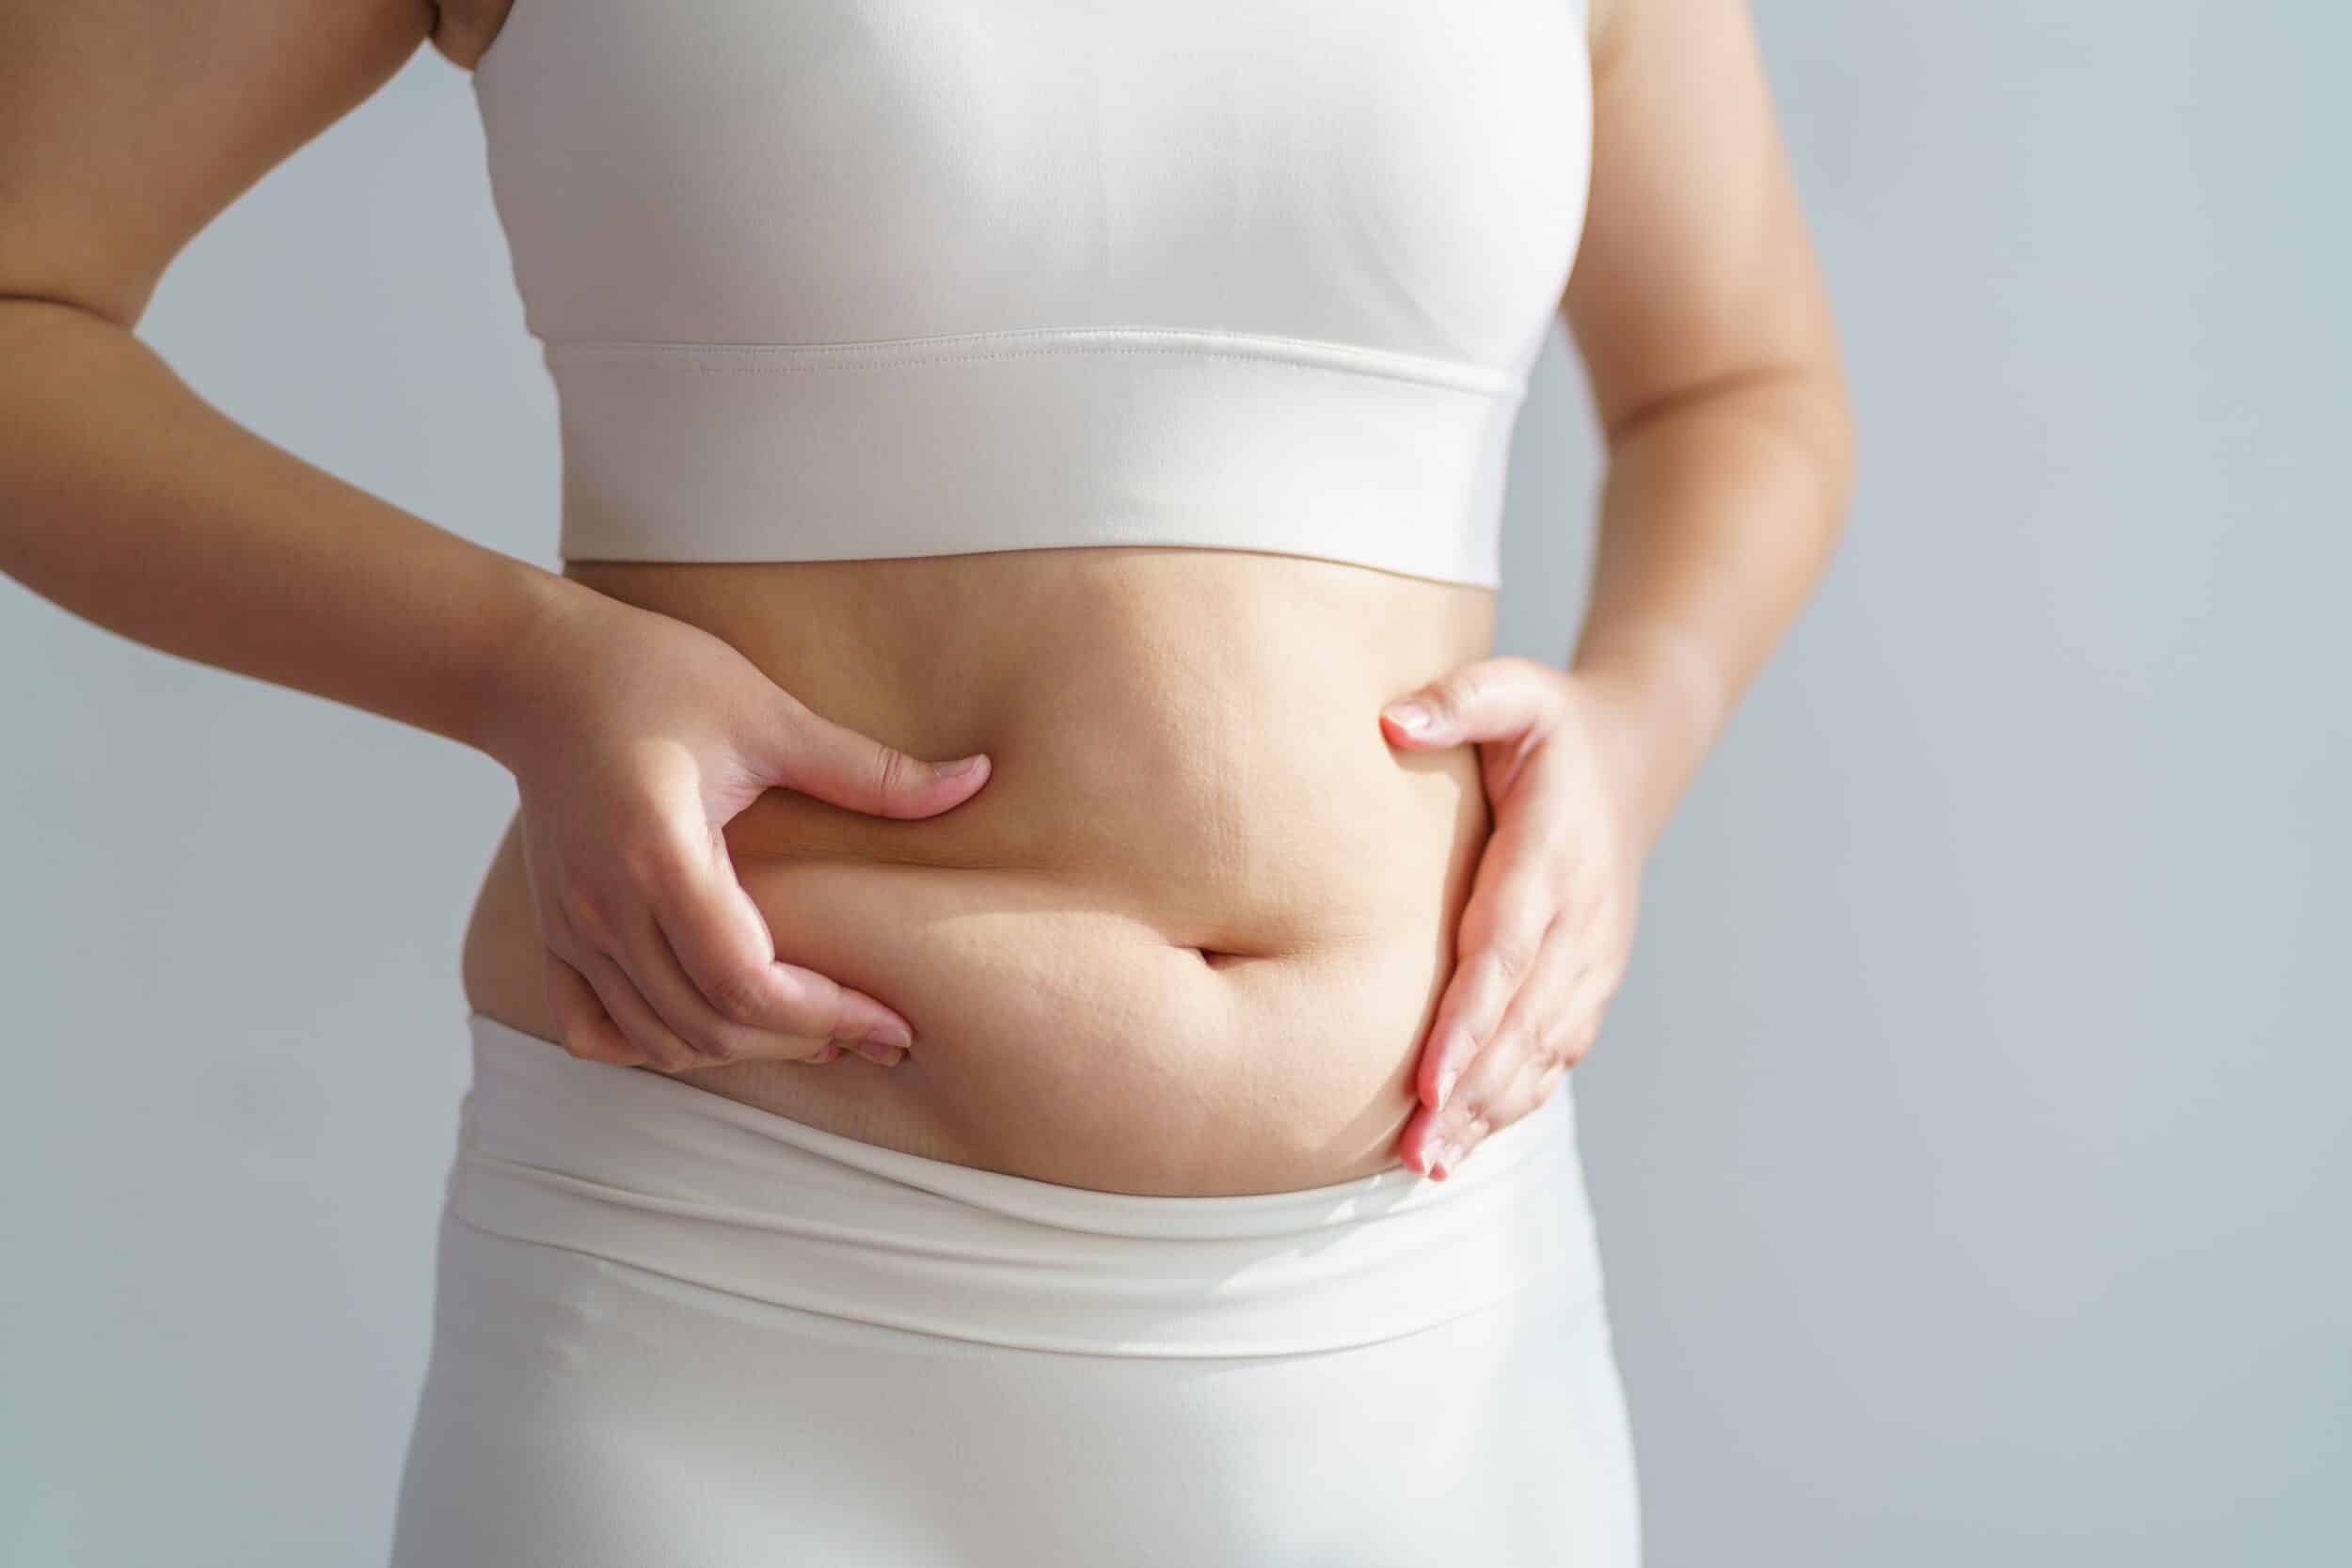 Can You Get Abdominal Liposuction After a Tummy Tuck?